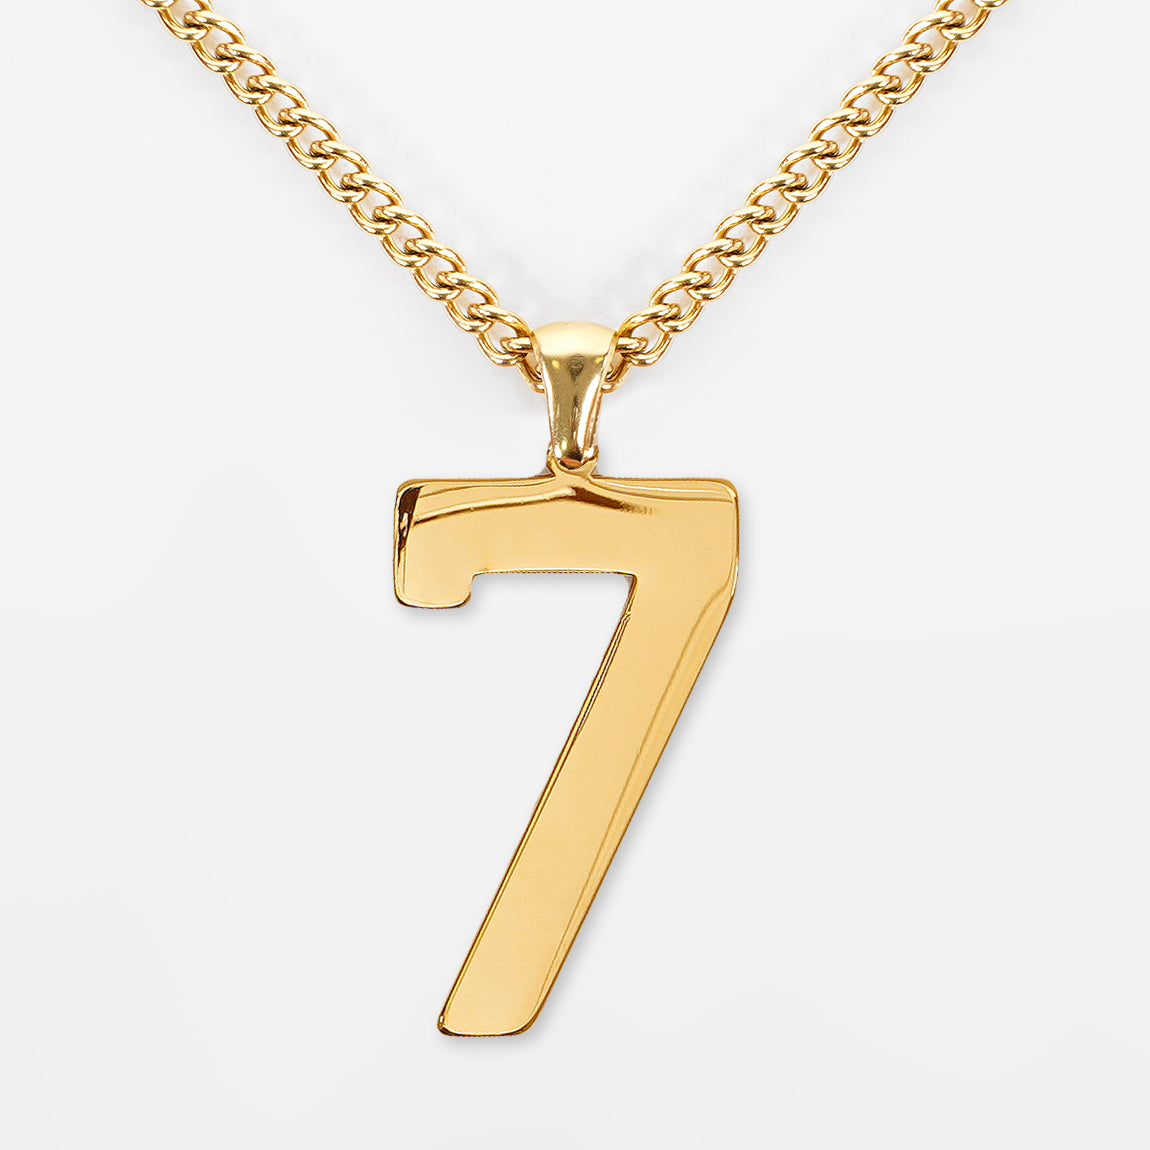 7 Number Pendant with Chain Necklace - Gold Plated Stainless Steel